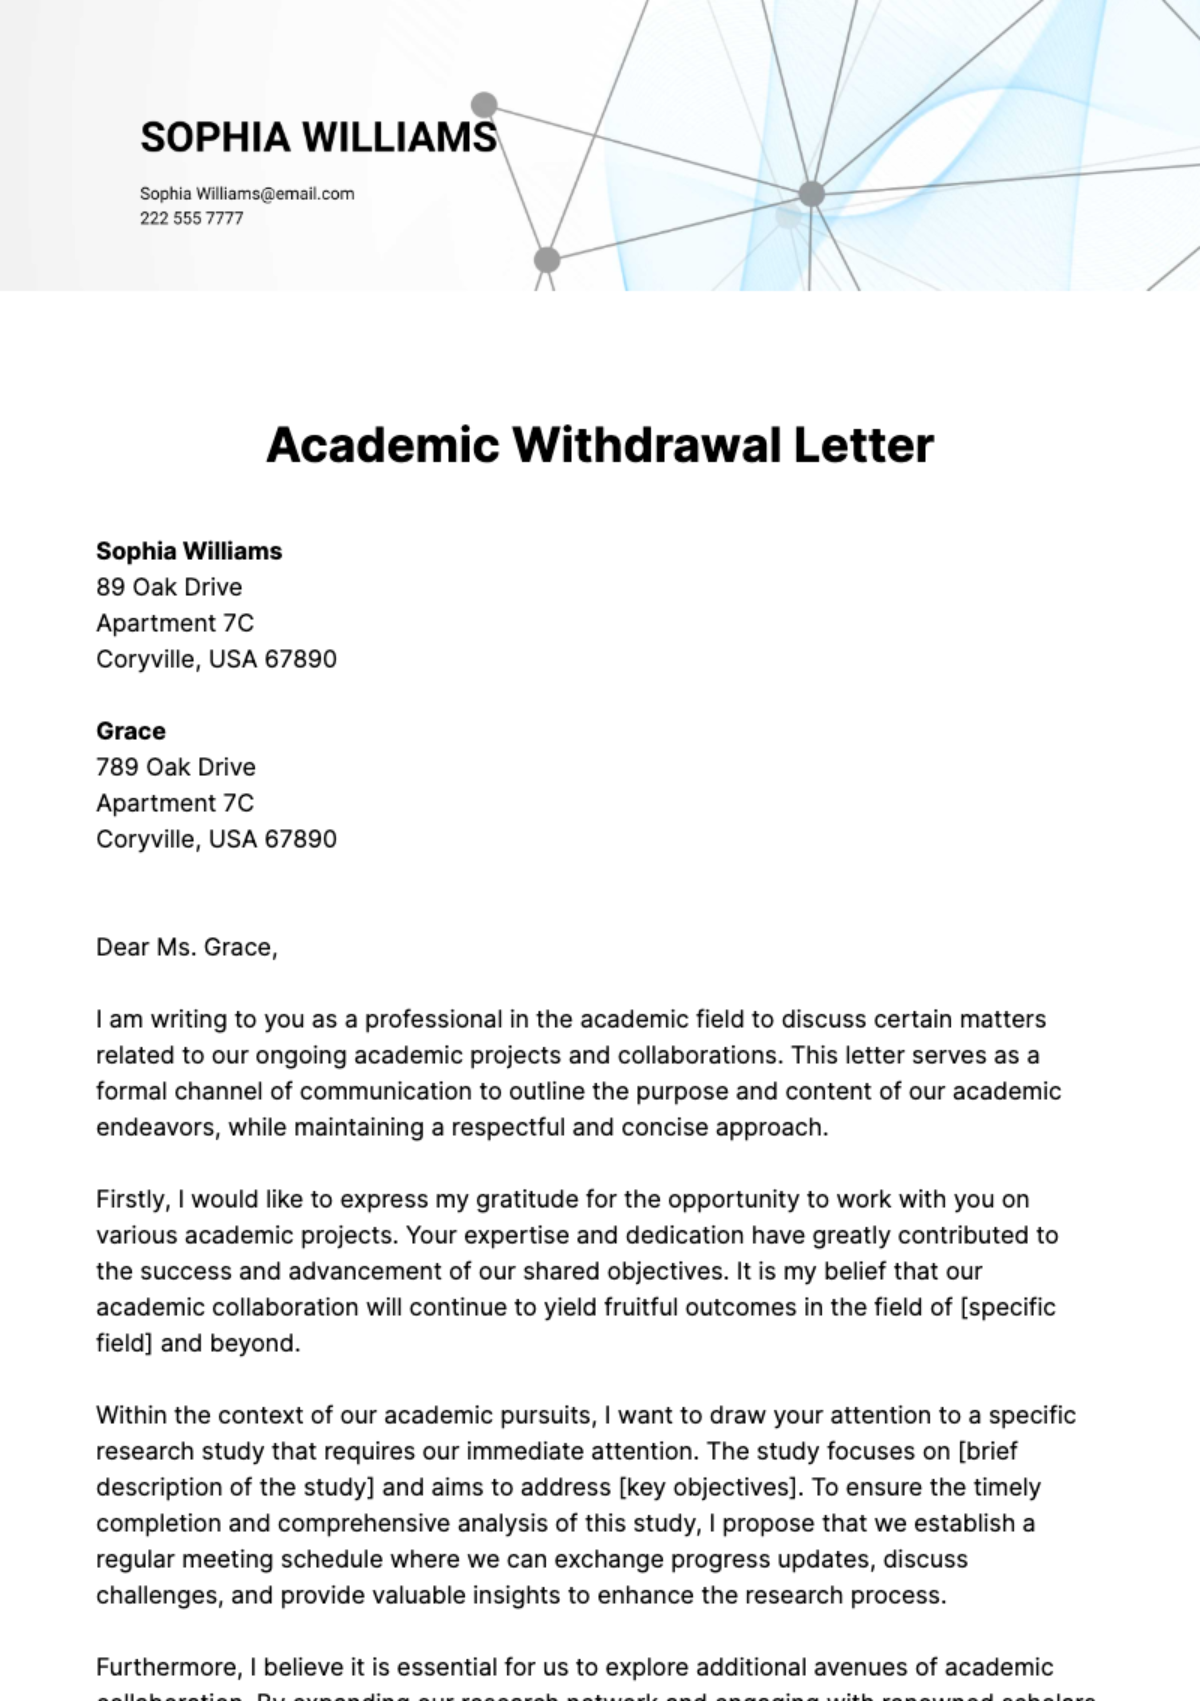 Academic Withdrawal Letter Template